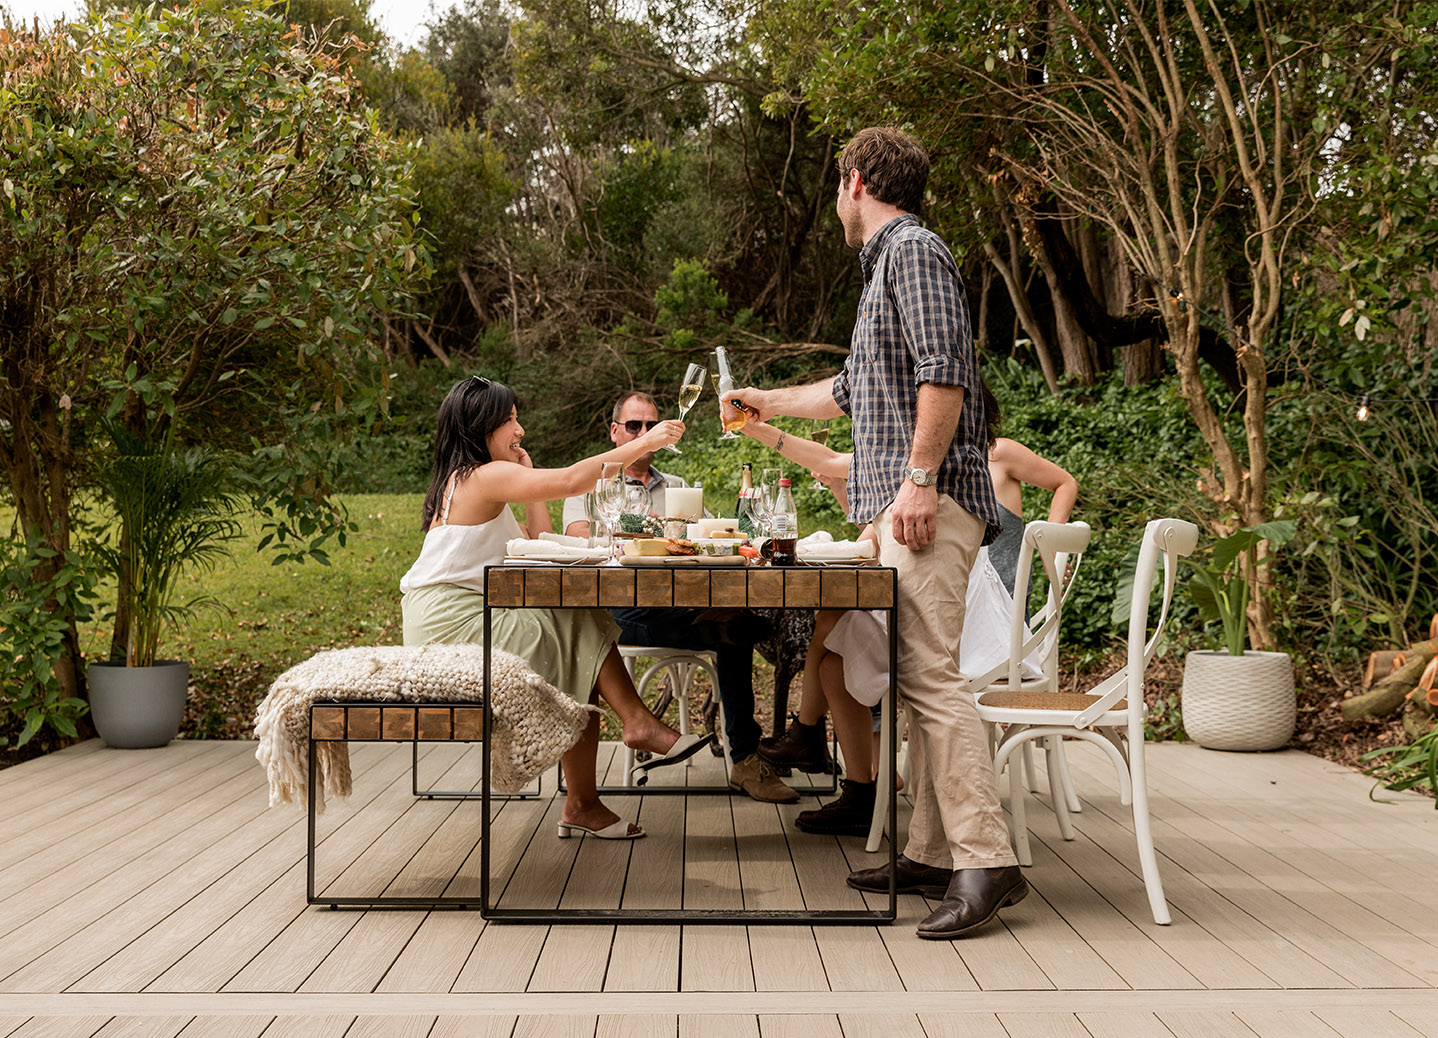 A group of people toasting at a table in a backyard.